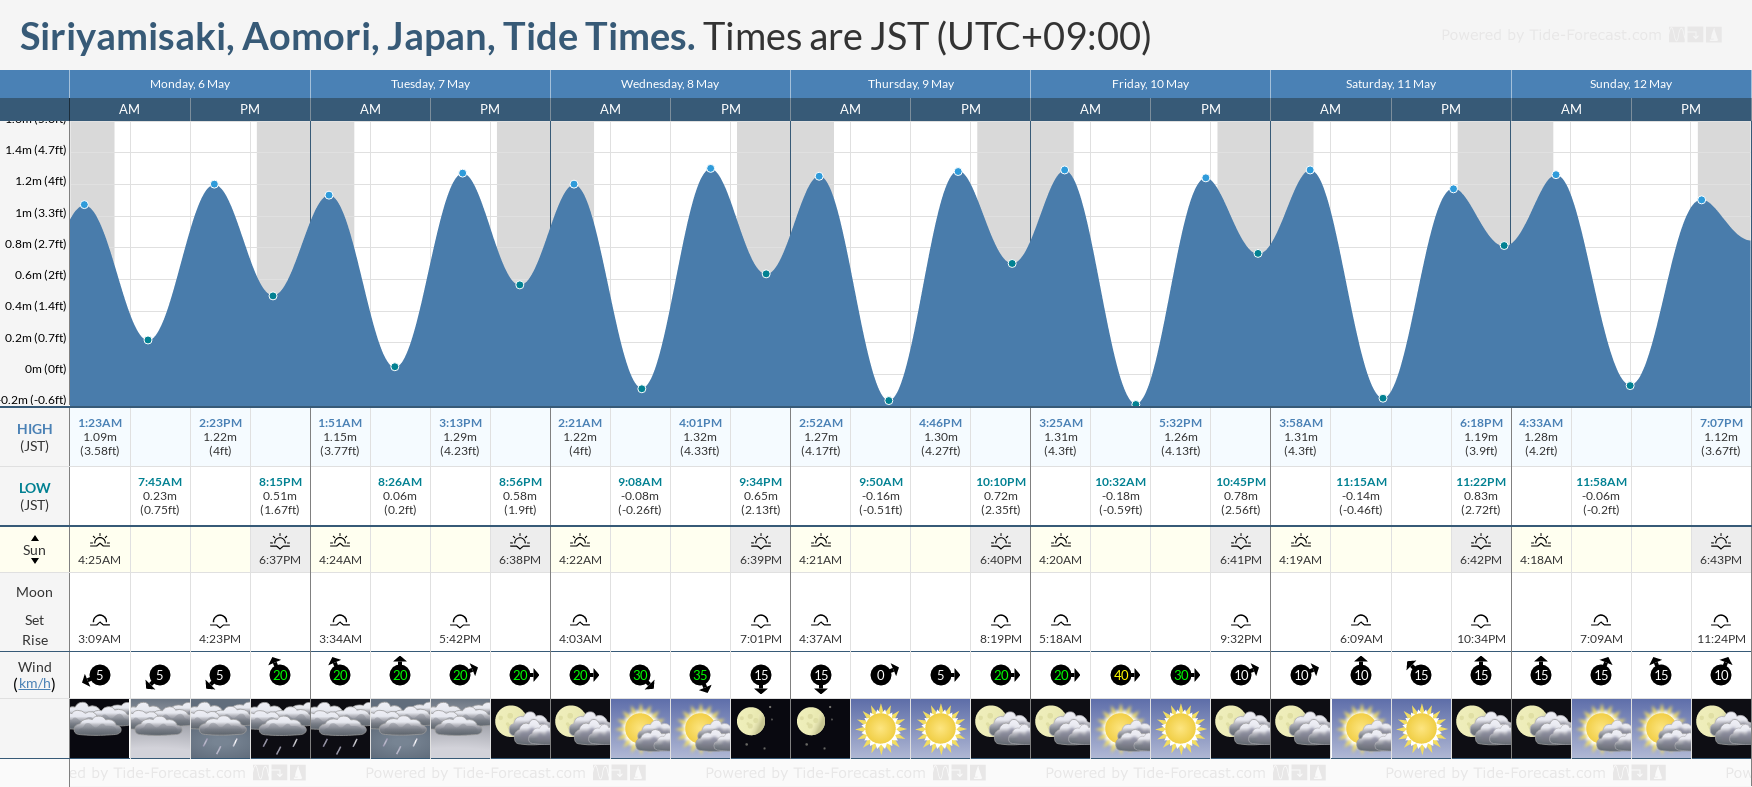 Siriyamisaki, Aomori, Japan Tide Chart including high and low tide tide times for the next 7 days